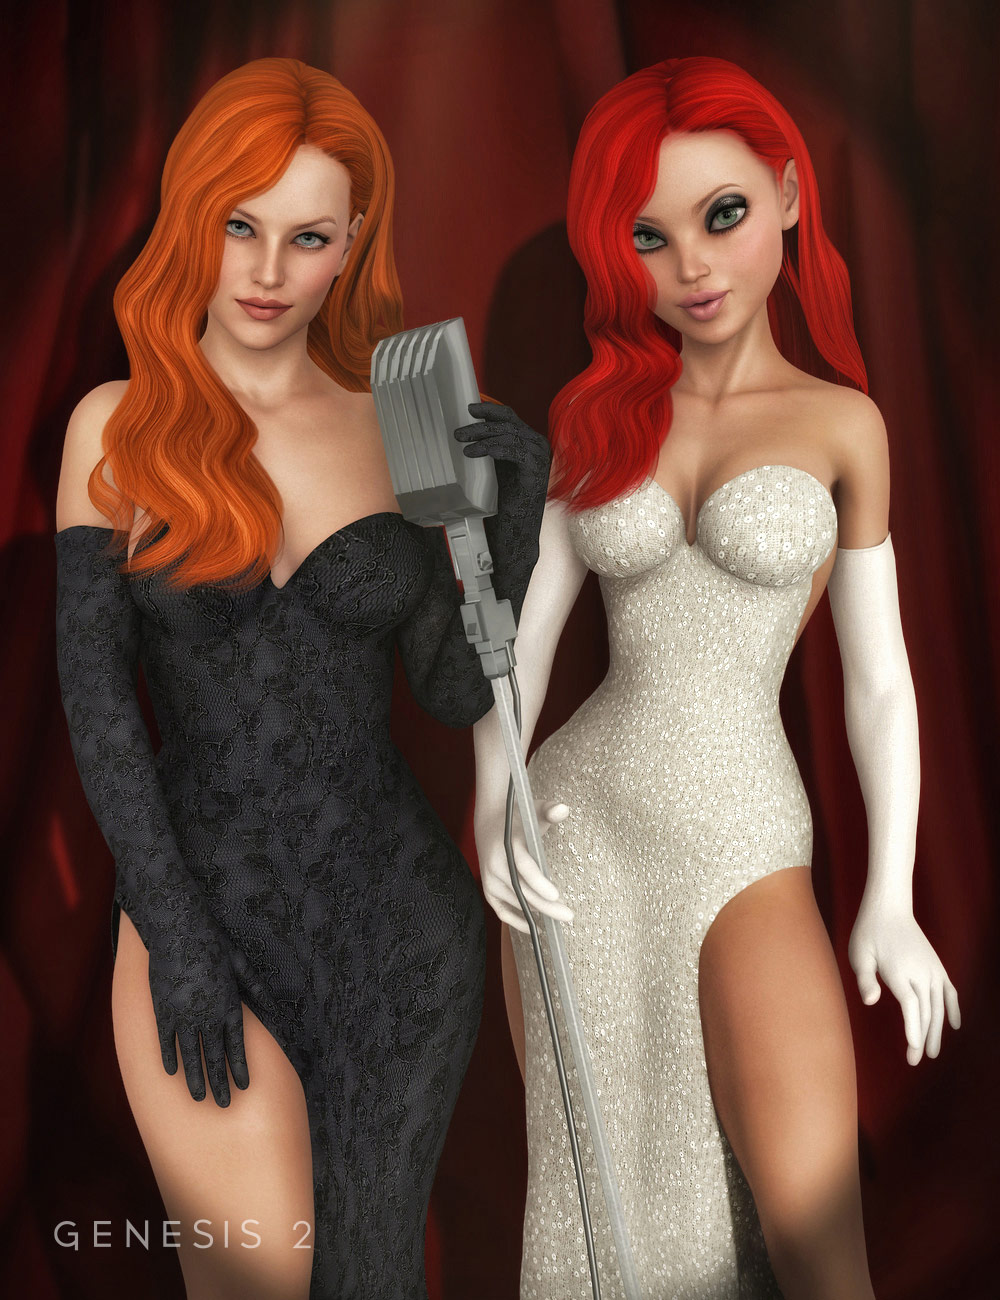 Jessica Dress Formal Textures by: Sarsa, 3D Models by Daz 3D